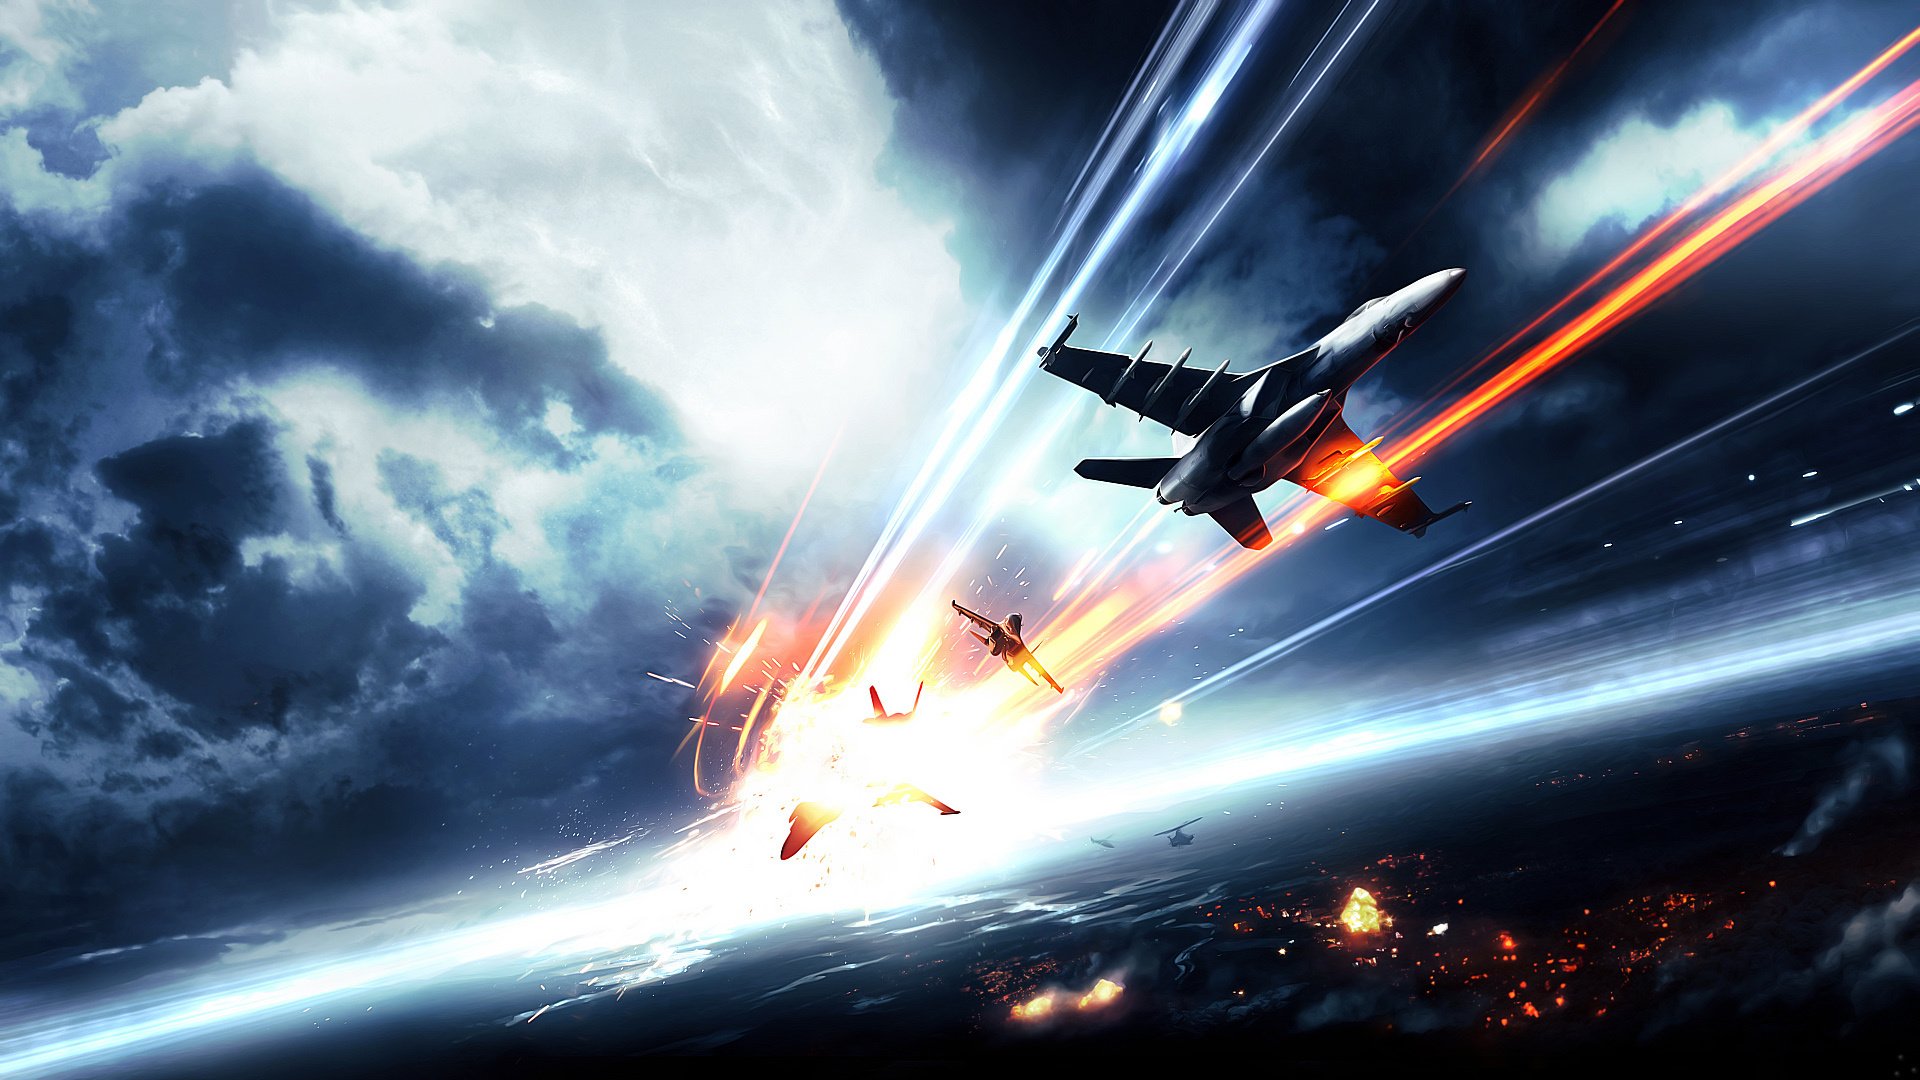 Download Jet Fighter Military Dogfight Airplane Aircraft Battlefield Video Game Battlefield 4  HD Wallpaper